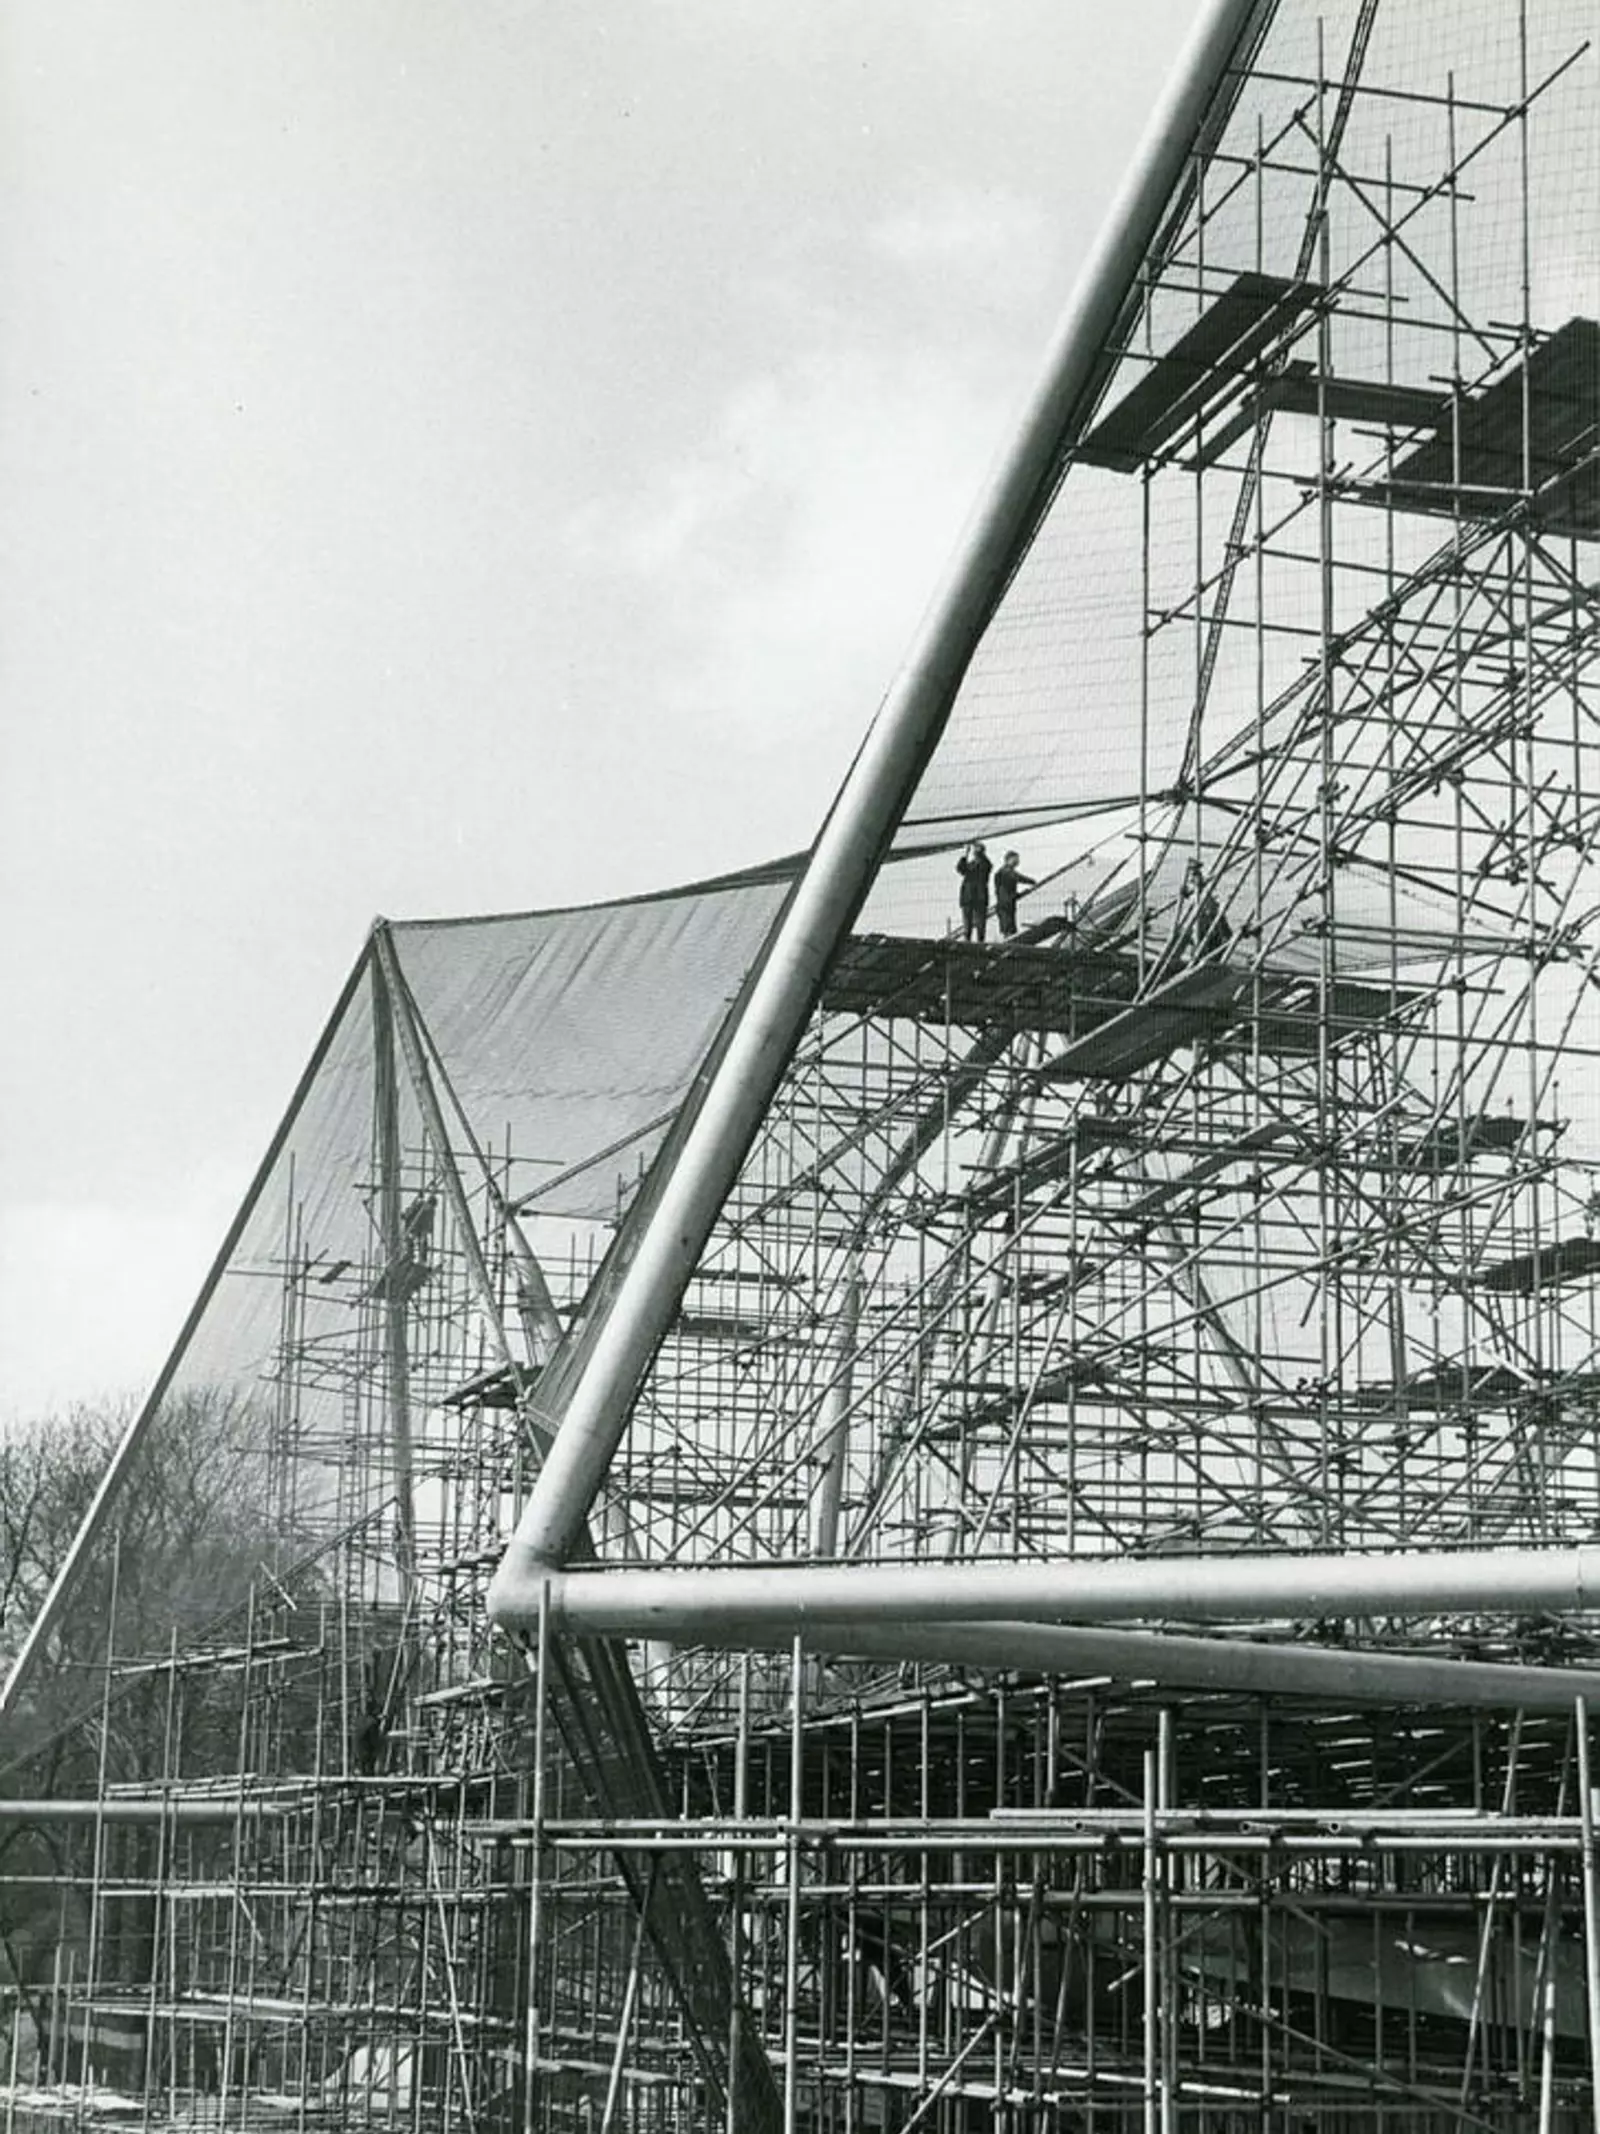 The Snowdon Aviary under construction in the summer of 1964. Seen from across the Regent's Canal with a lifebuoy on the railings in the foreground. 